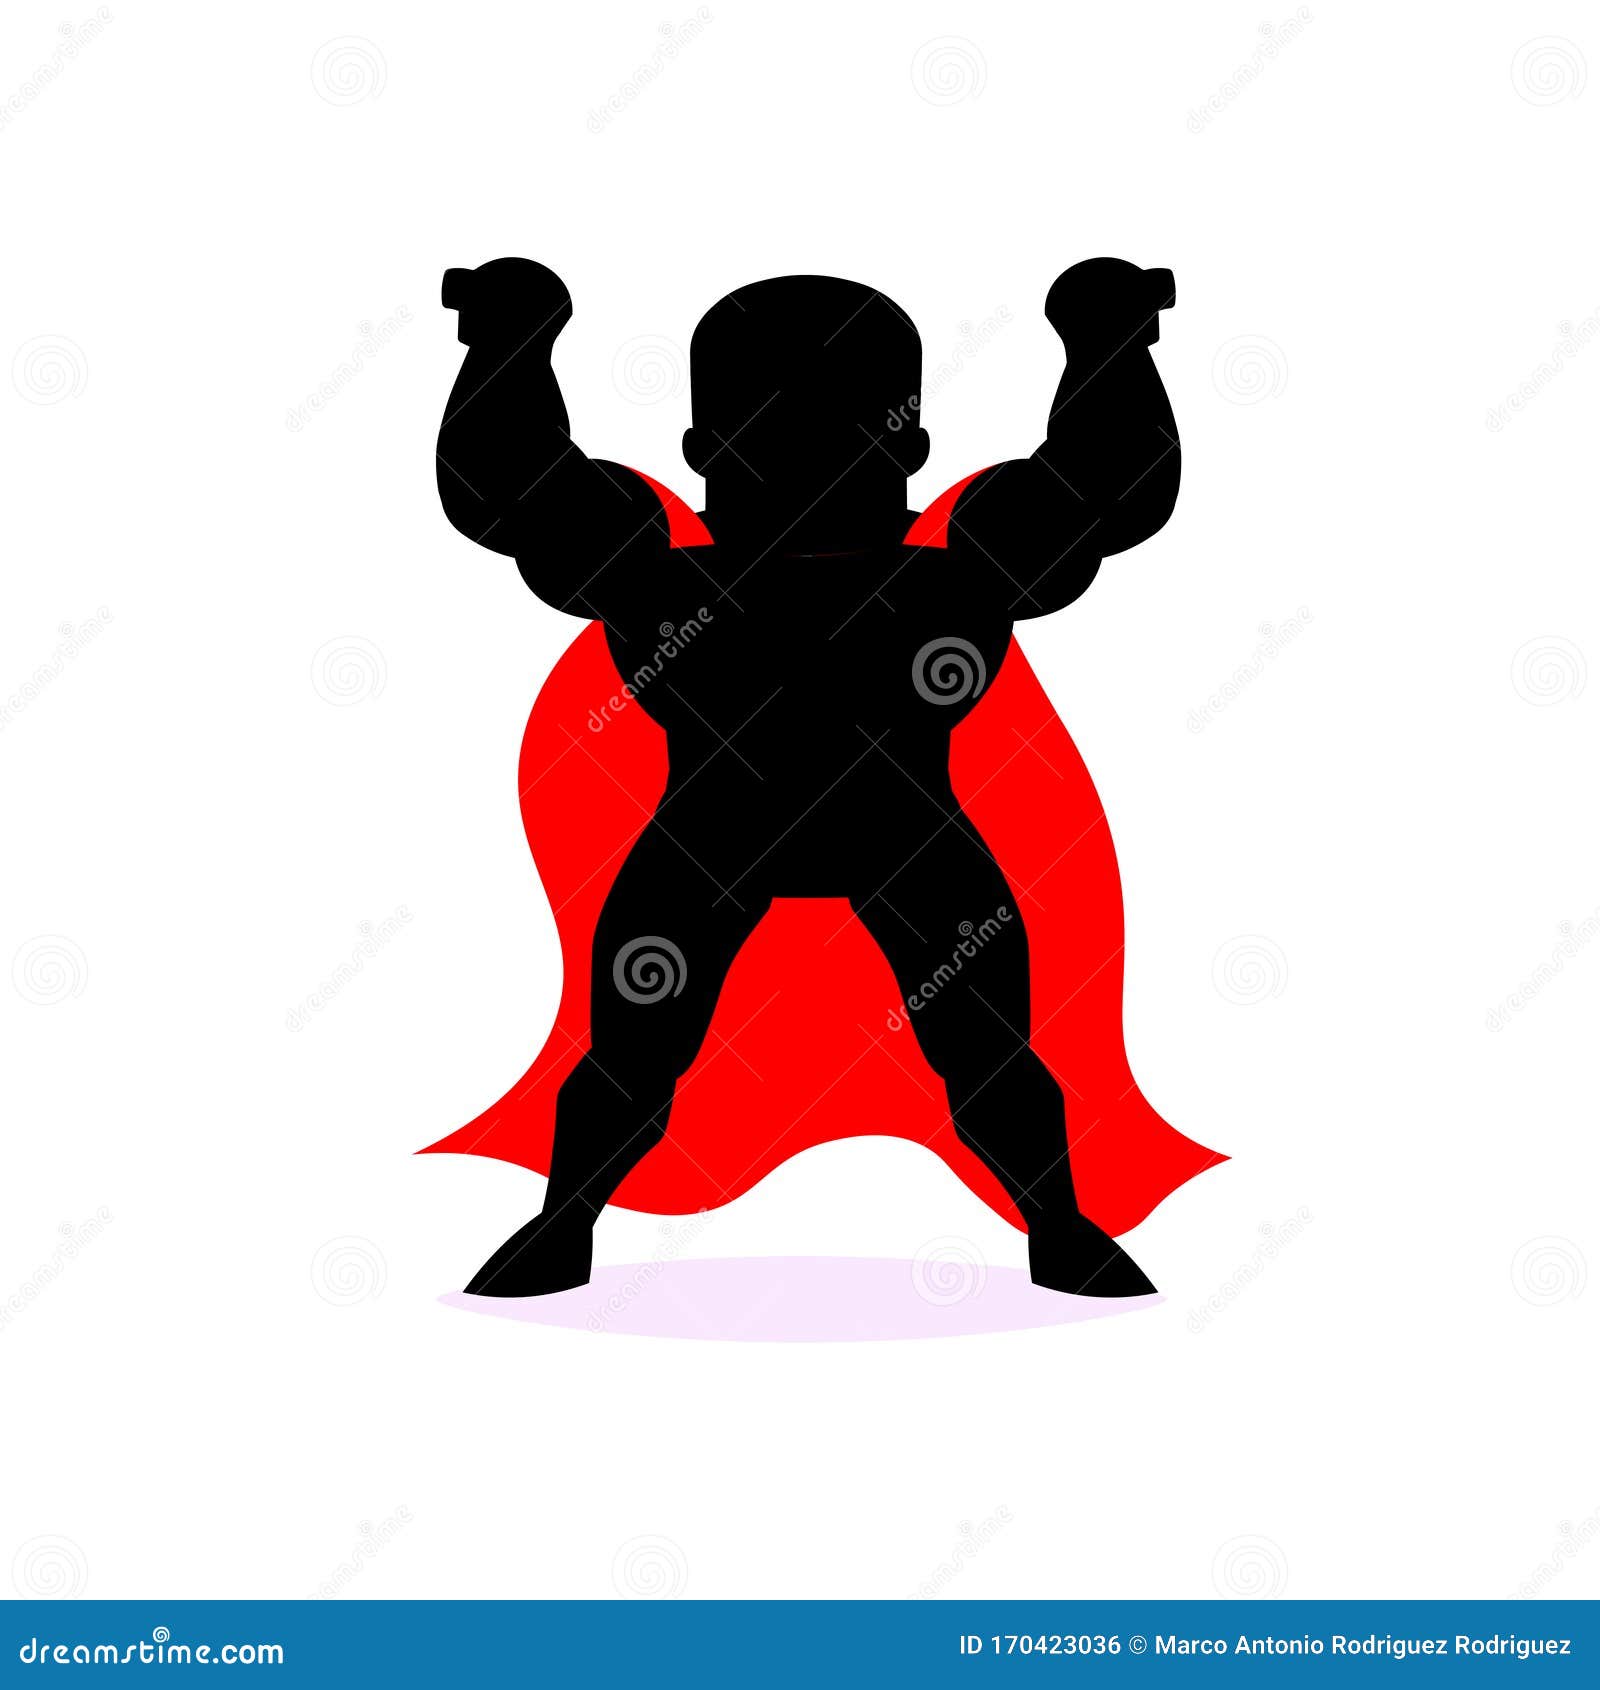 Superhero Pose With A Man In 3d Render Illustration Stock Photo, Picture  and Royalty Free Image. Image 91821264.